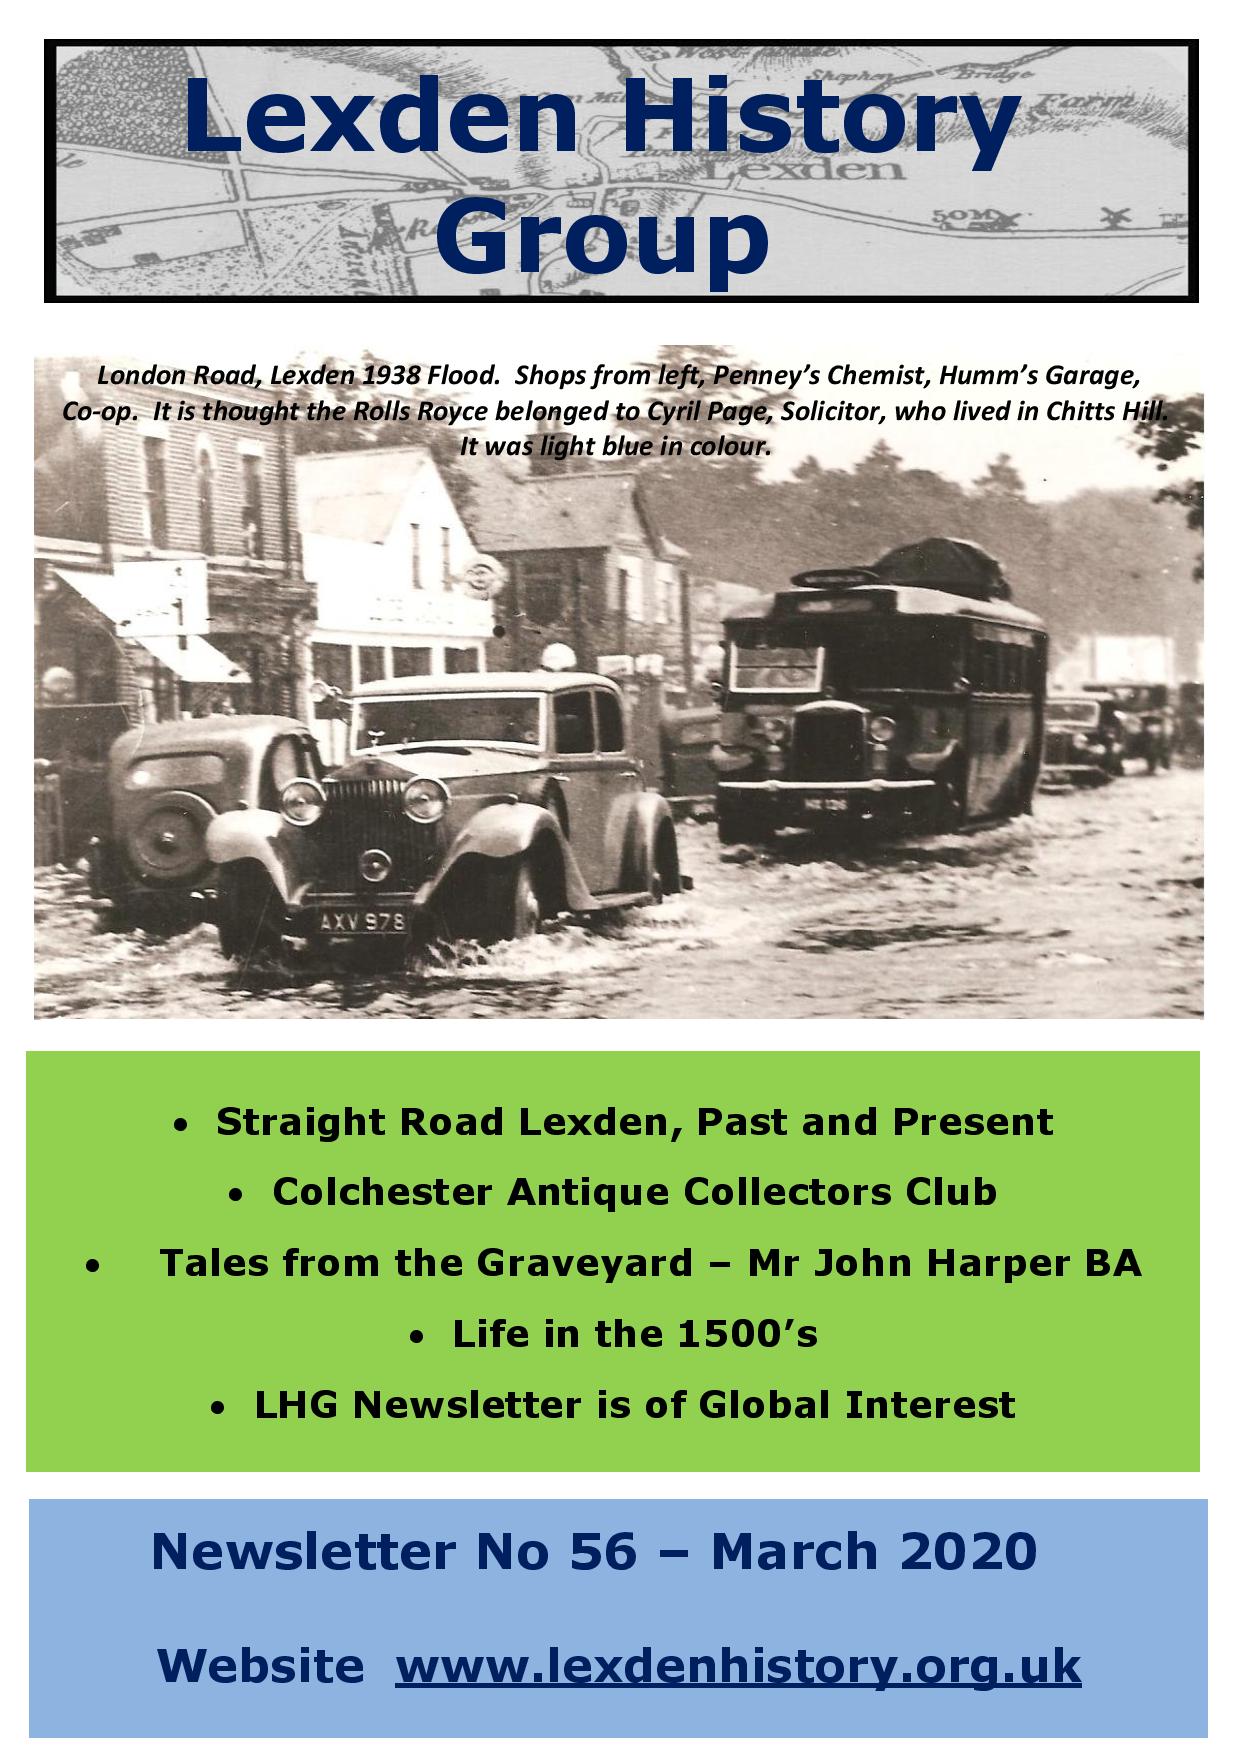 Lexden History Group Newsletter, March 2020 Issue 56